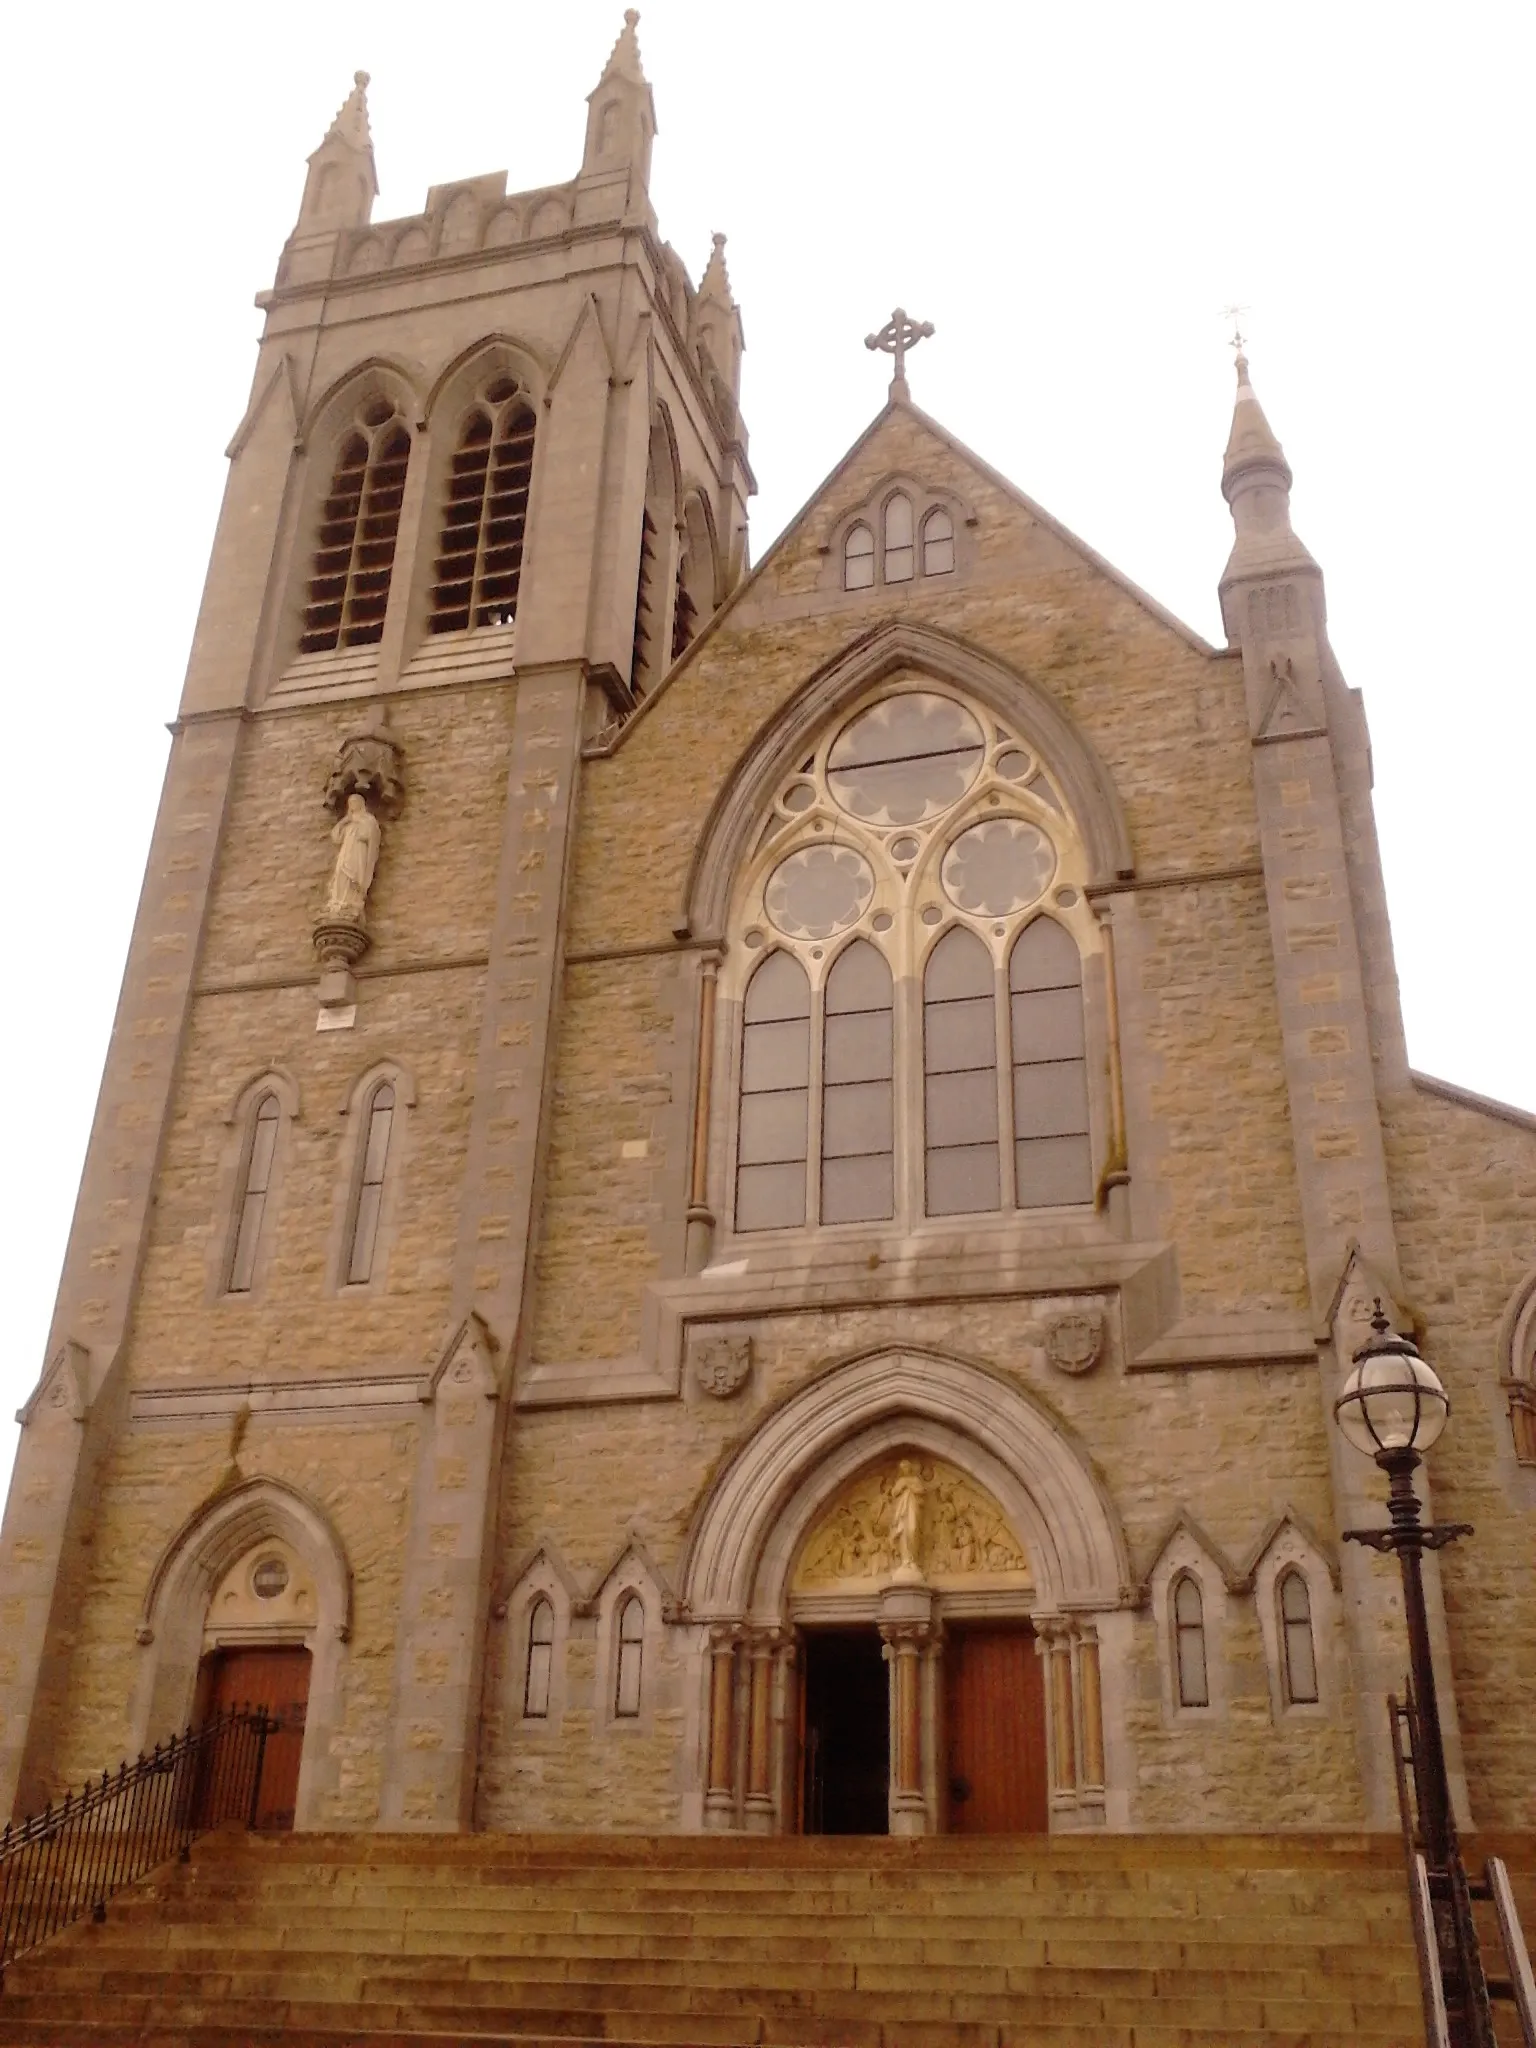 Photo showing: Front Façade - St Mary's Church in Carrick on Shannon, Ireland